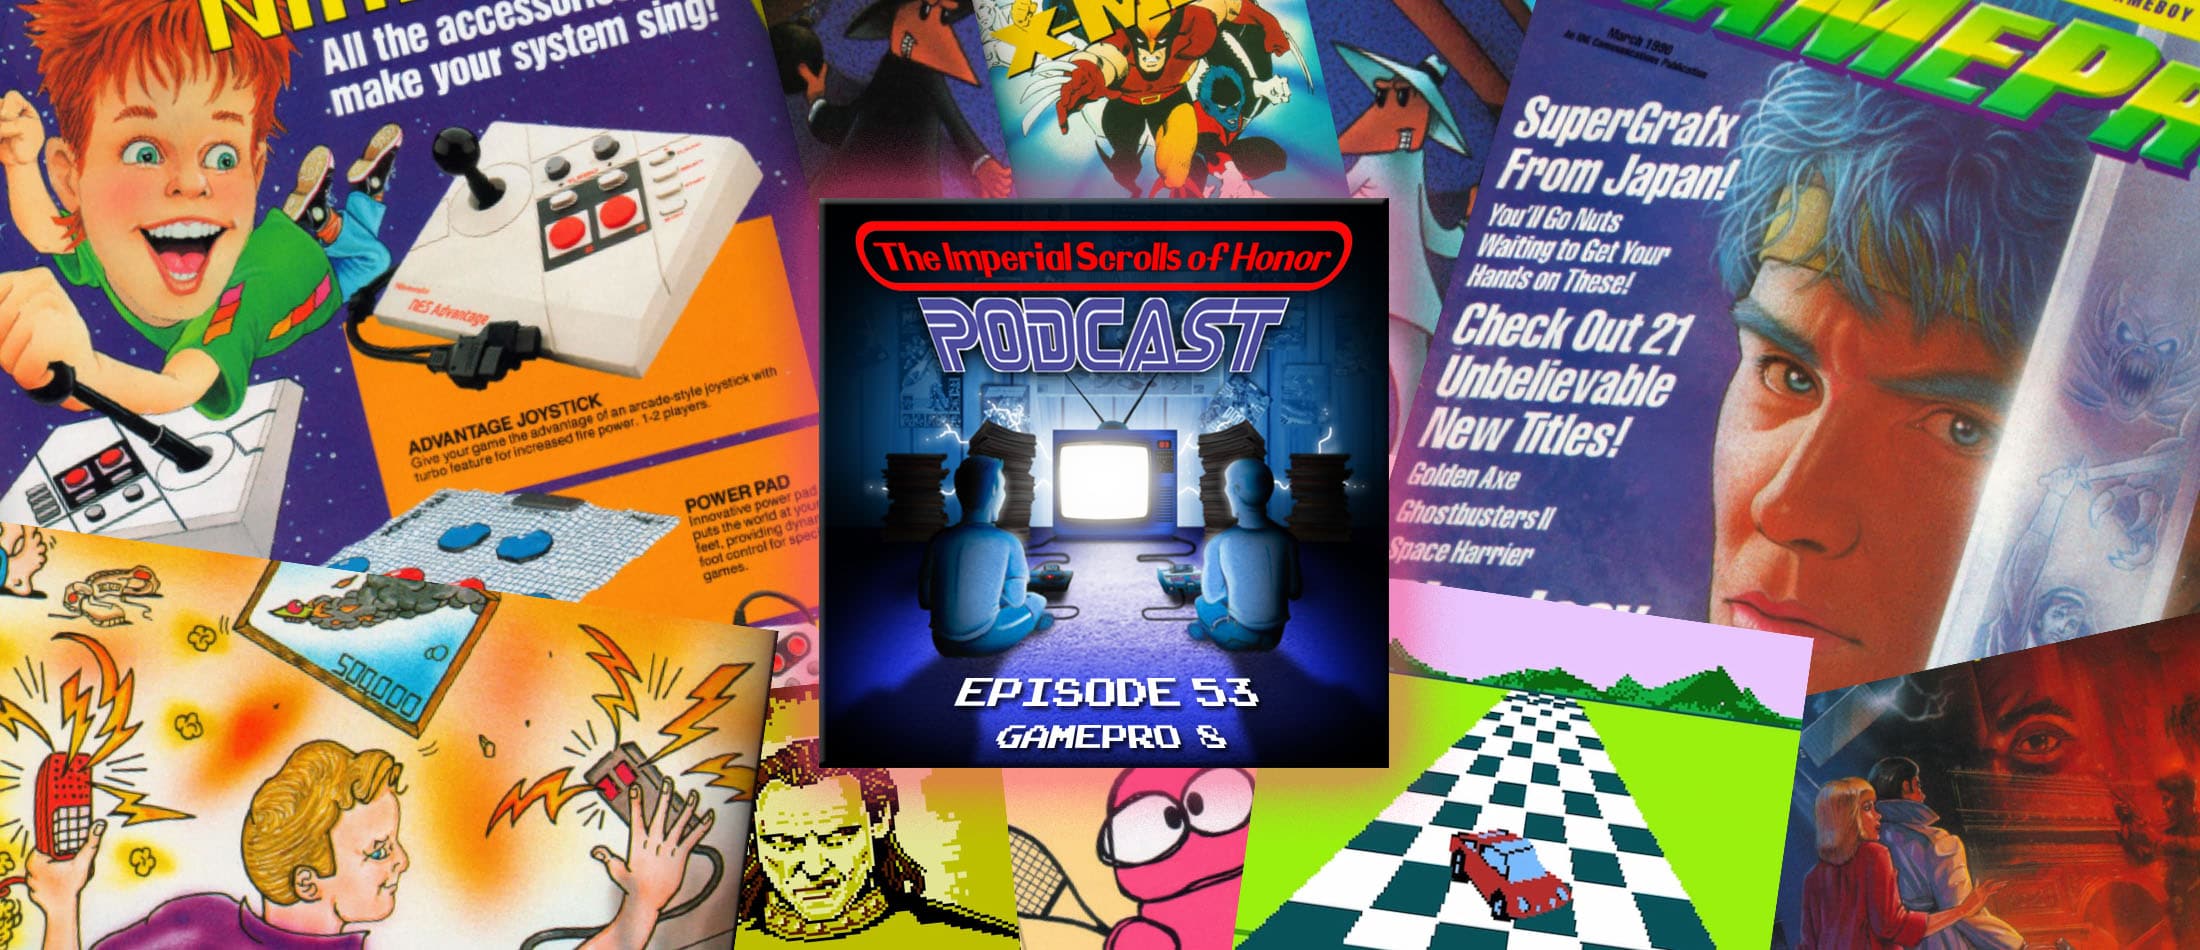 The Imperial Scrolls of Honor Podcast - Ep 53 - GamePro #8